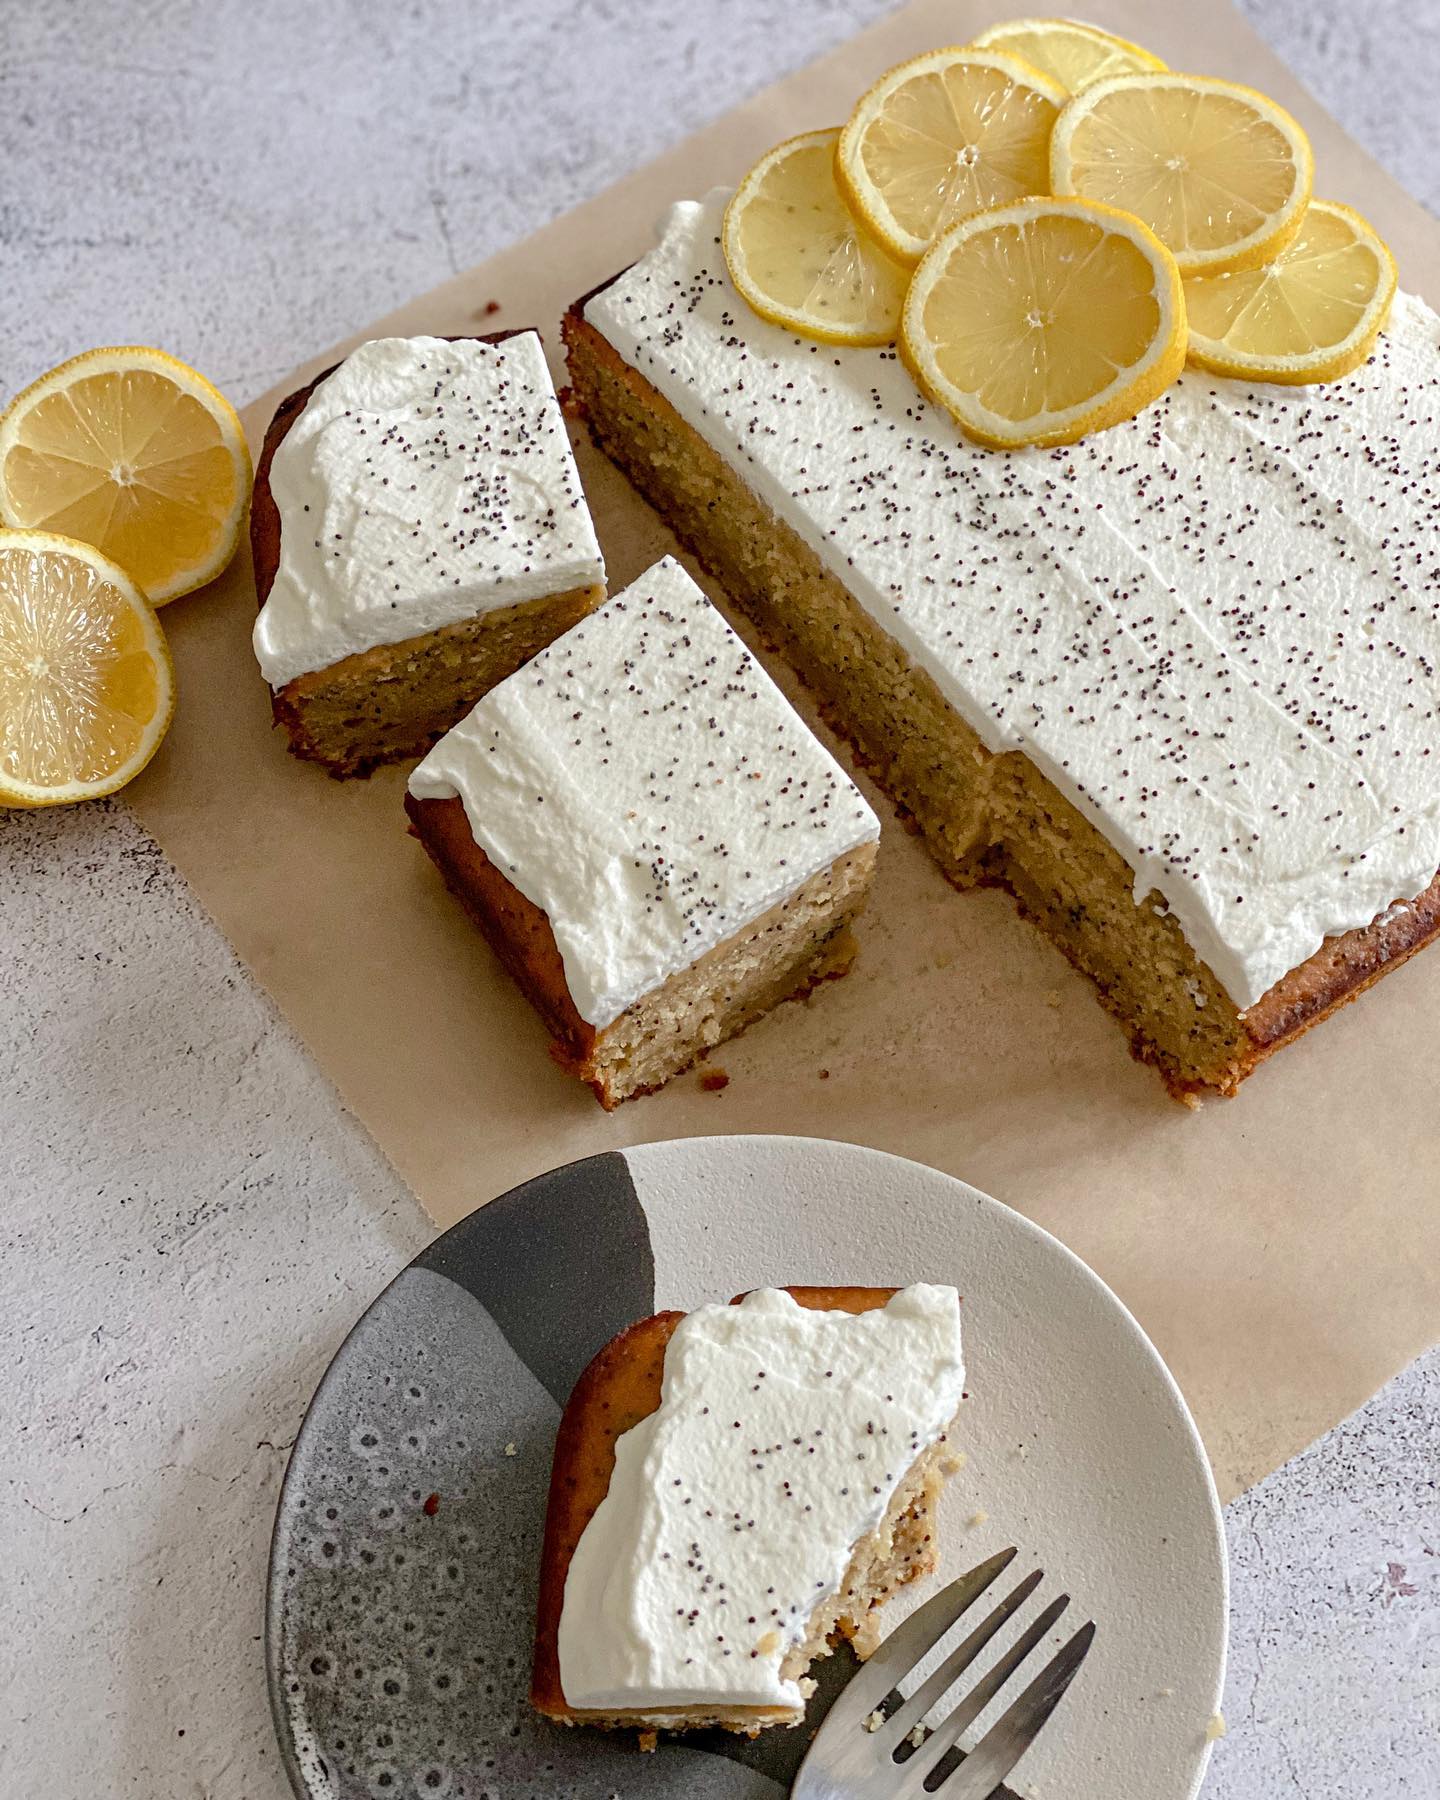 The first day of May calls for a super summery cake and this lemon poppy seed yogurt cake couldn’t be better! 

This cake couldn’t be easier to make. It can be done all in one bowl and it’s light refreshing and super moist. It’s basically like sunshine in a piece of cake! 

Recipe is up on the site! Link up in bio. 
__

https://crispandcrumble.com/lemon-poppy-seed-yogurt-cake/